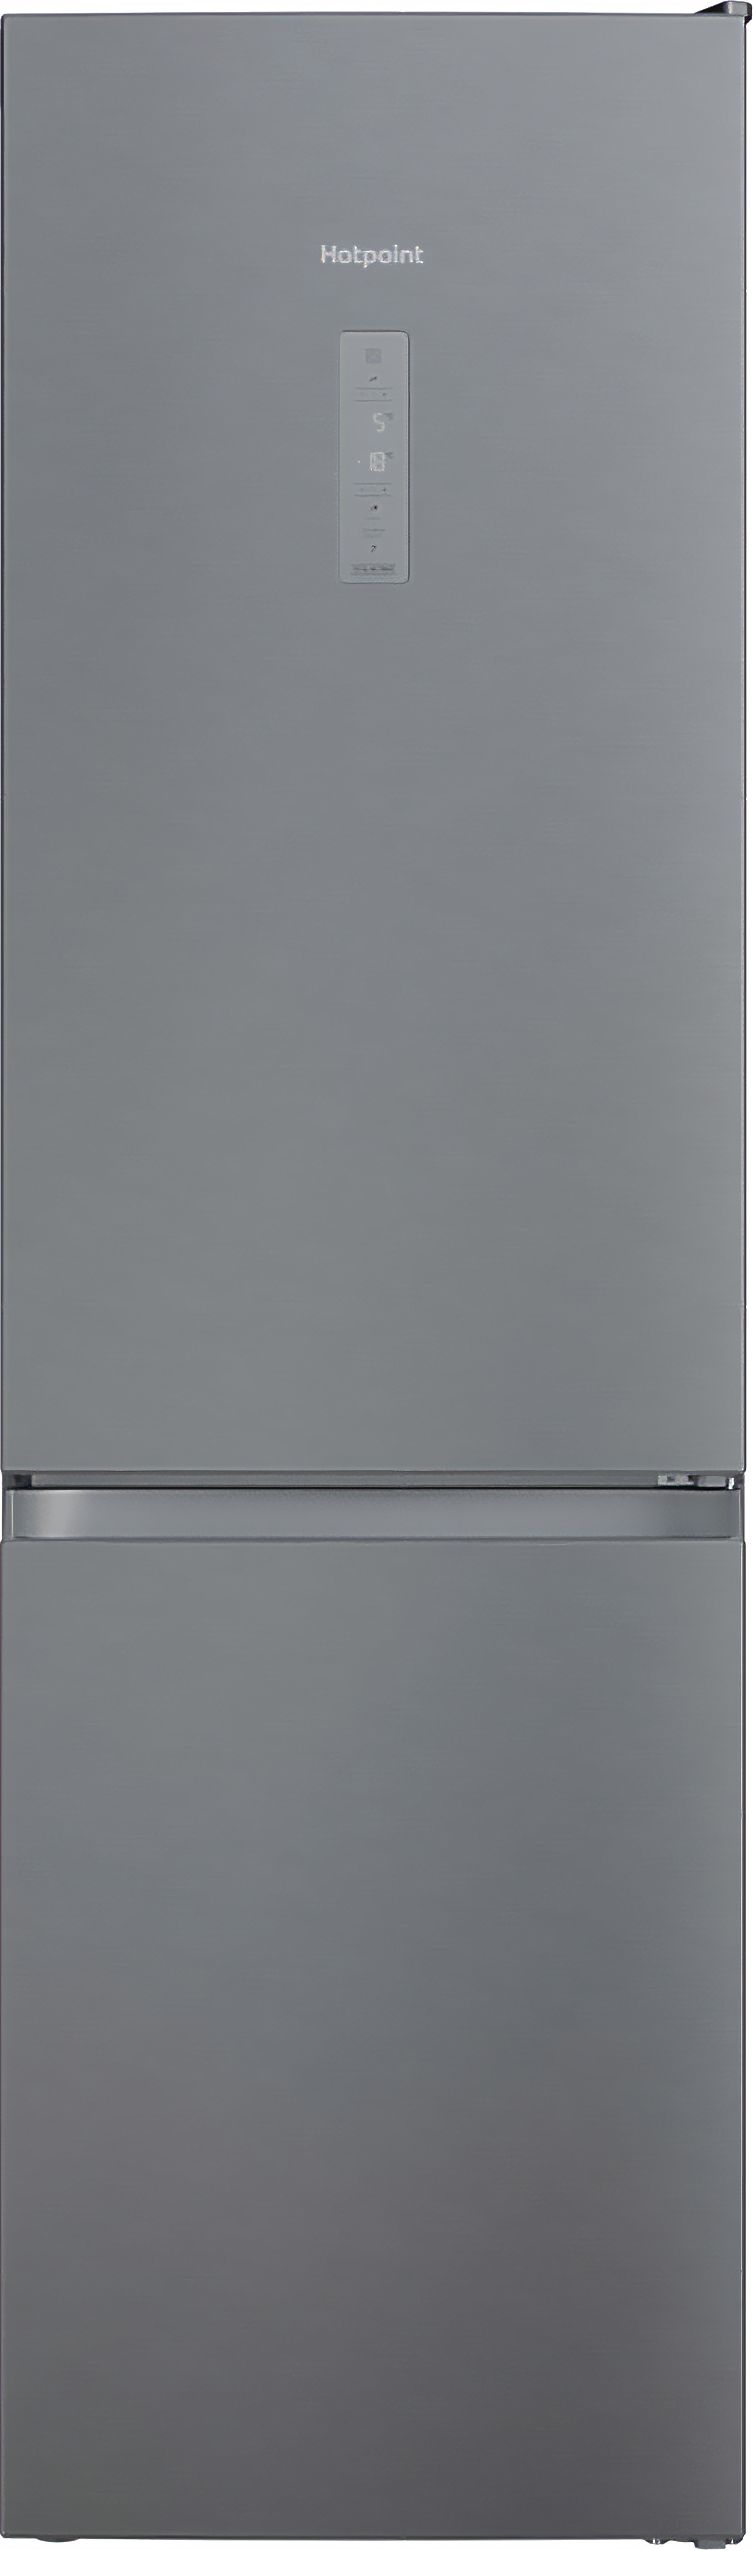 Hotpoint H7X93TSXM 70/30 No Frost Fridge Freezer - Stainless Steel - D Rated, Stainless Steel